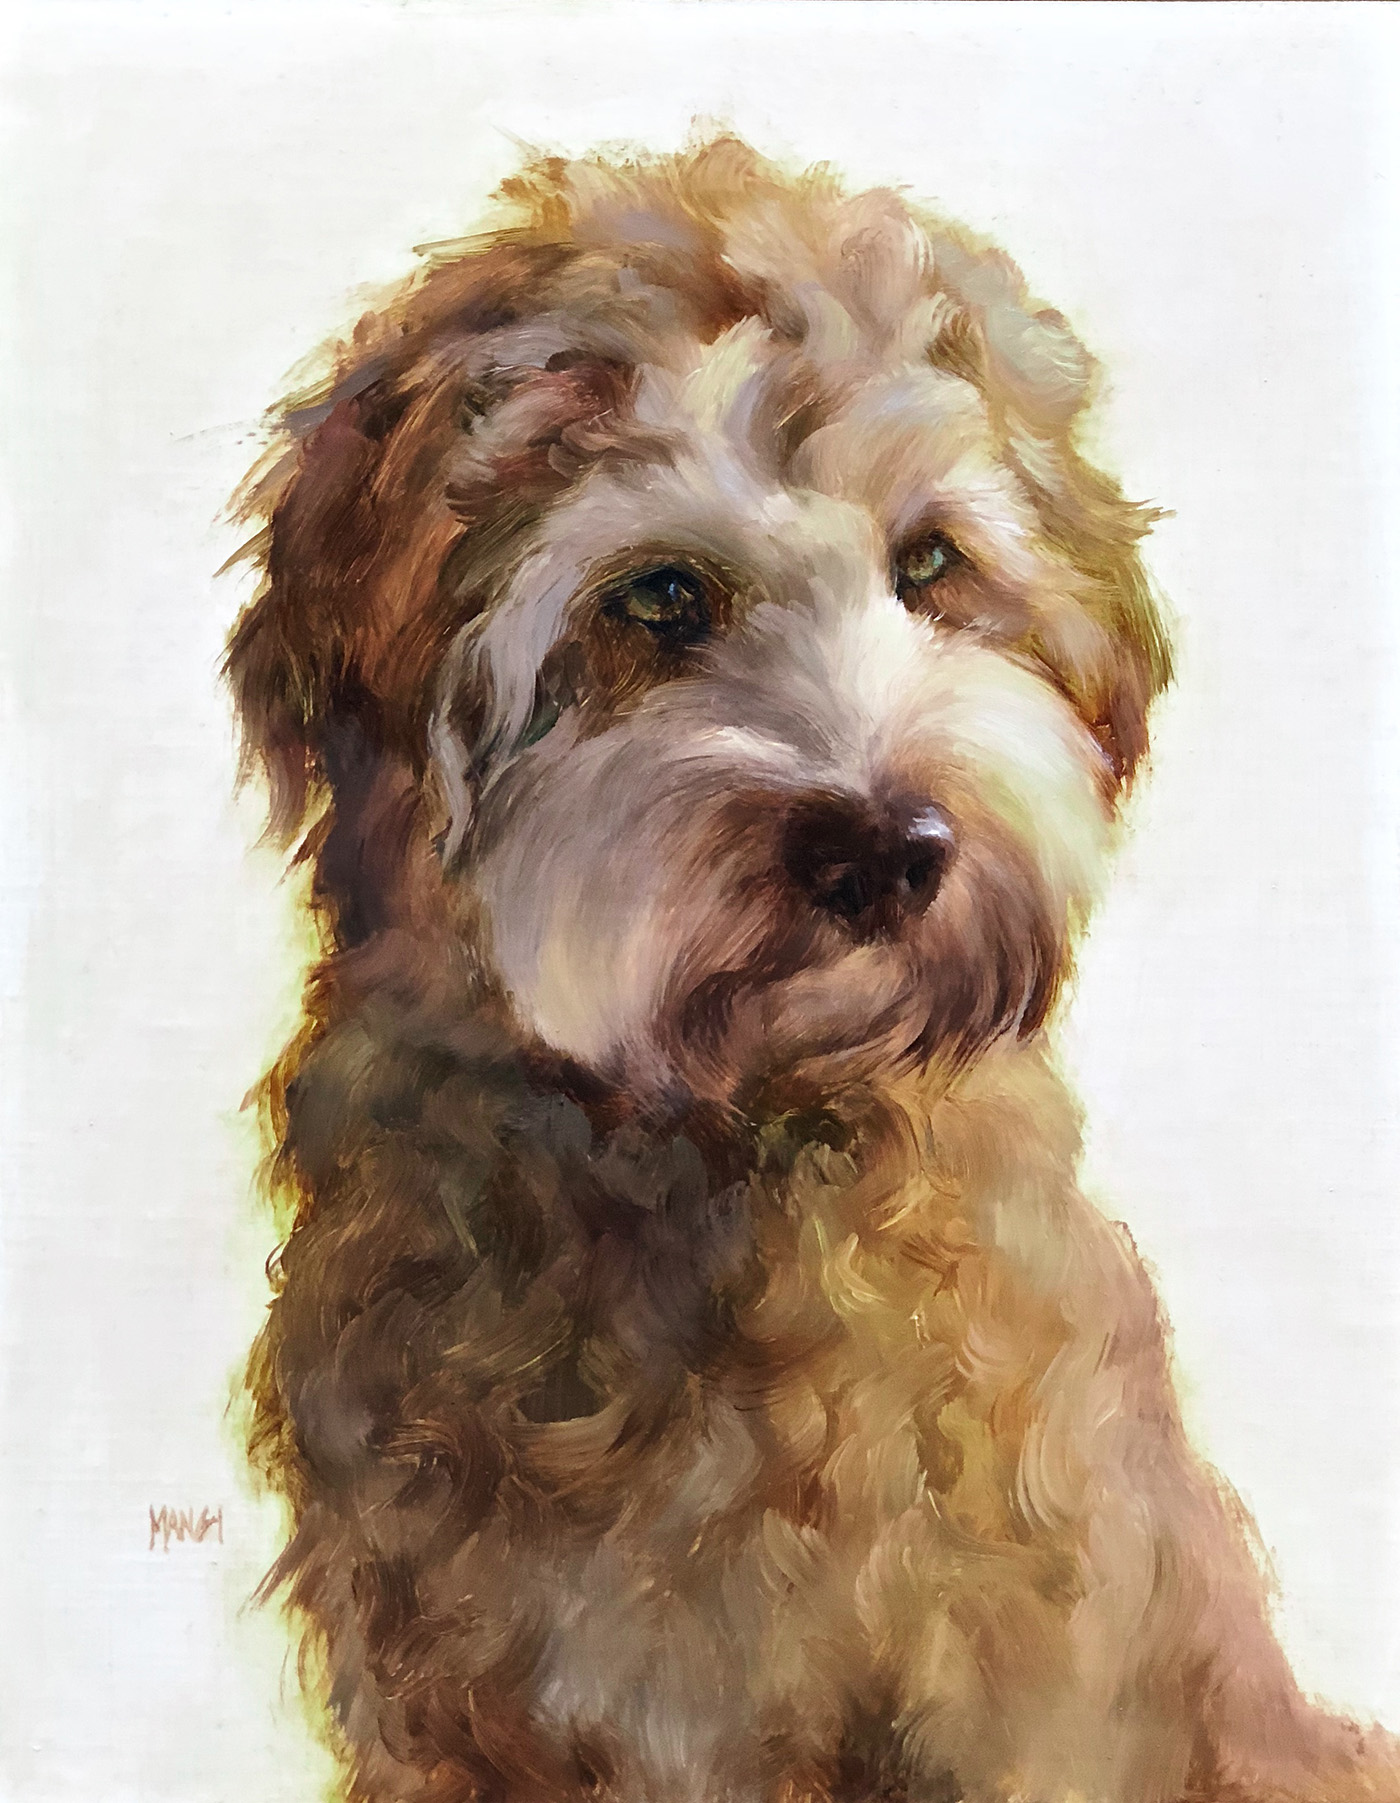 oil painting of a golden, curly dog with a white face